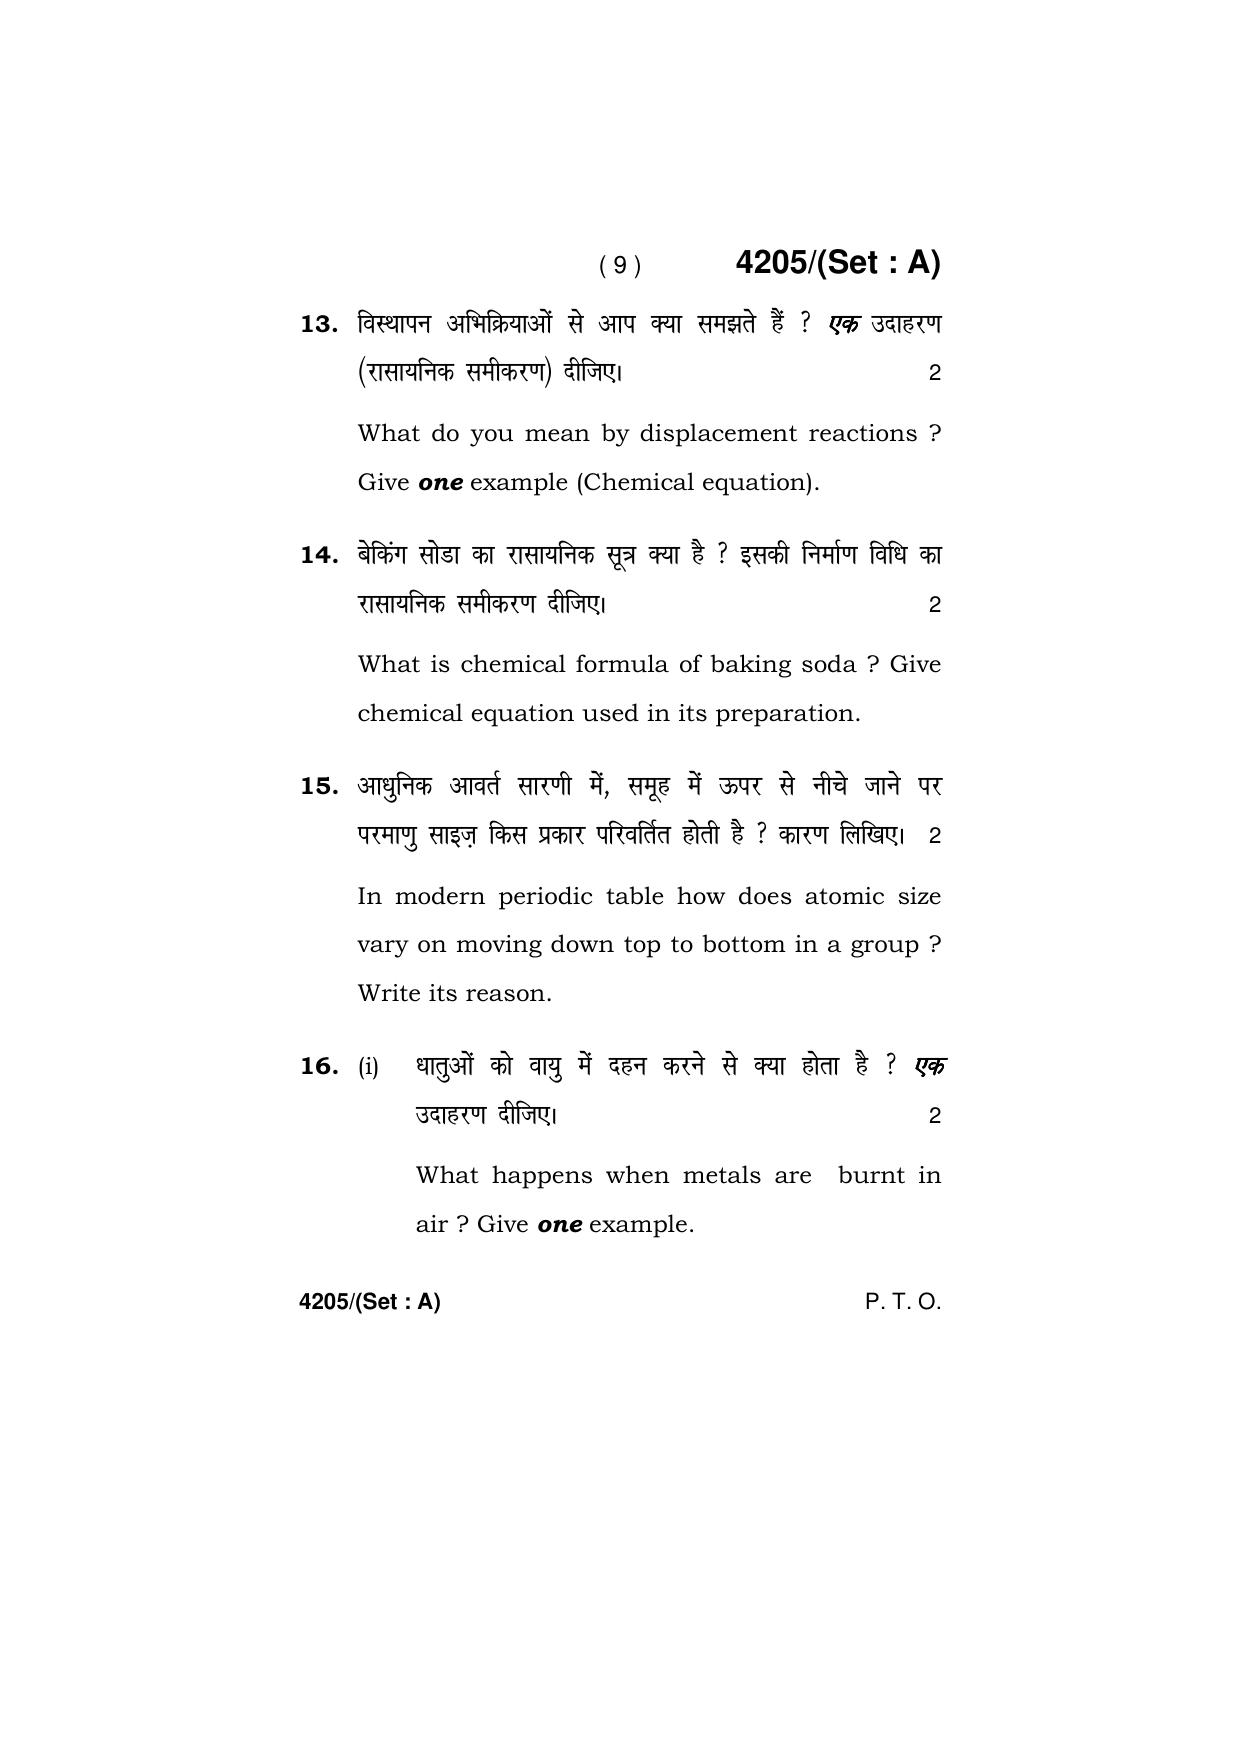 Haryana Board HBSE Class 10 Science (All Set) 2019 Question Paper - Page 9